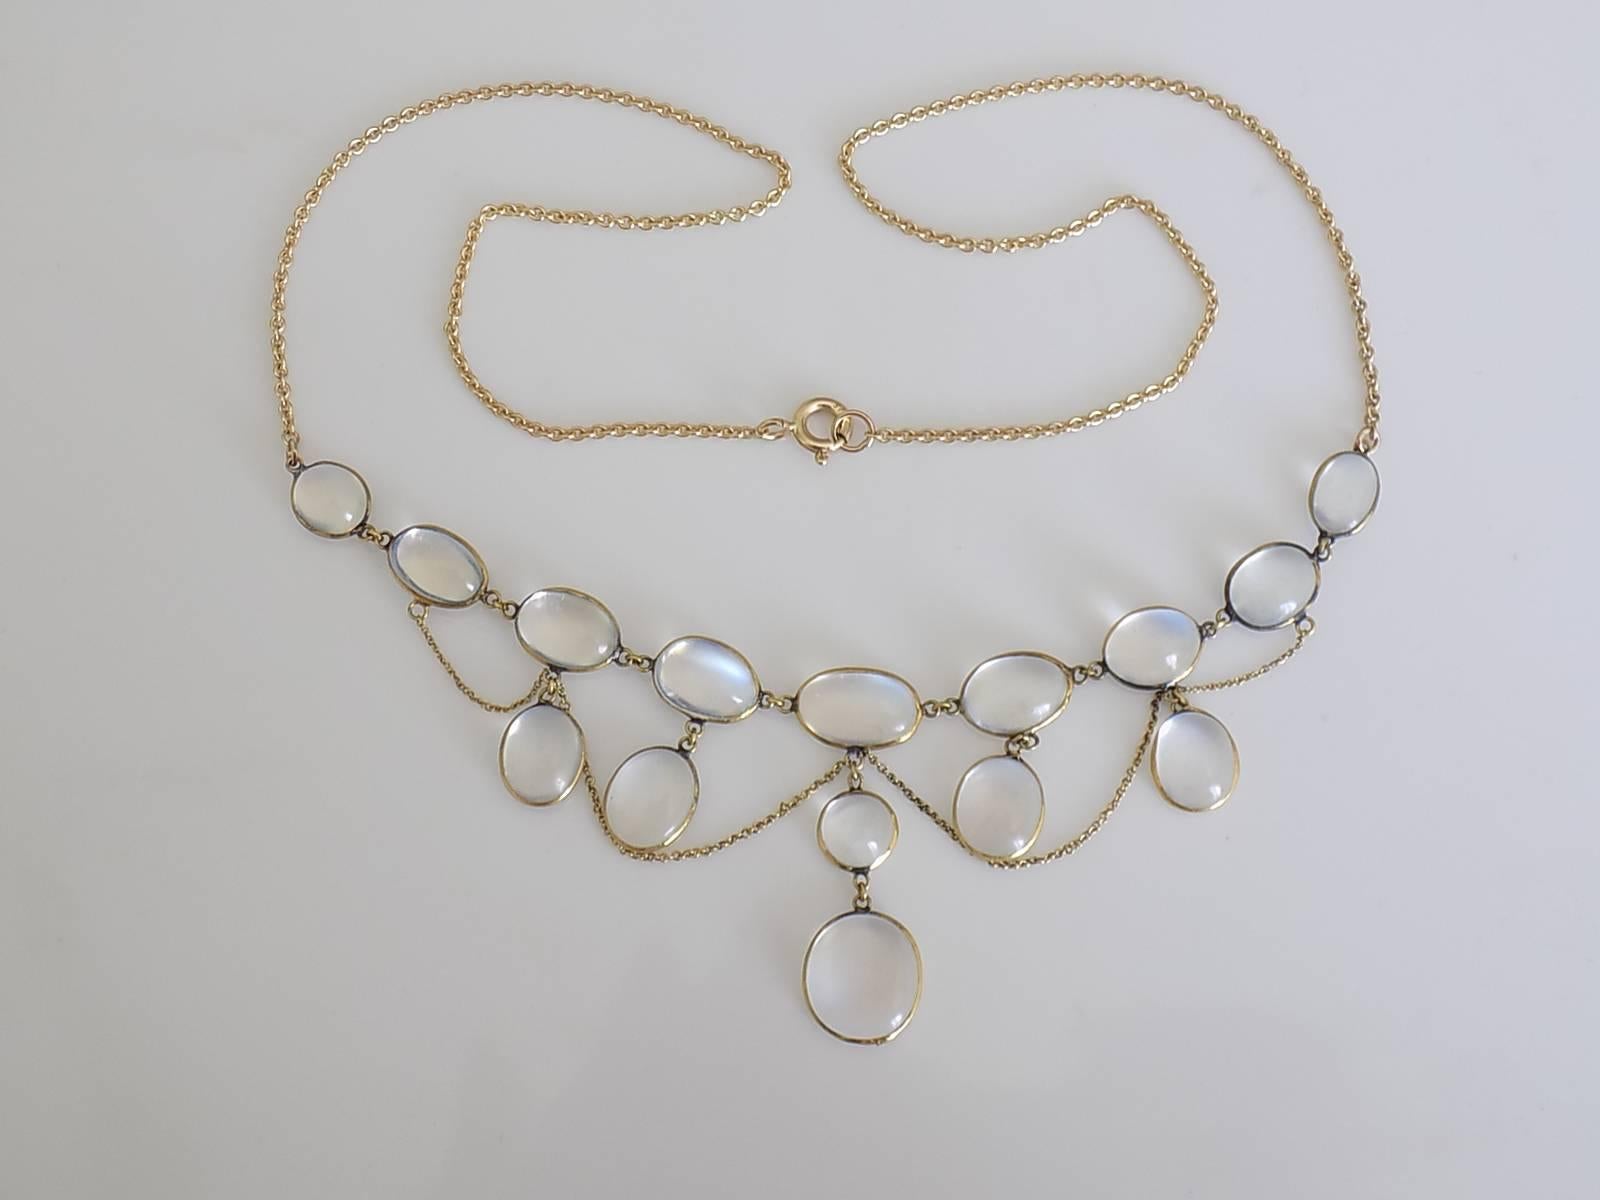 Women's Edwardian Yellow Gold and Moonstone Necklace